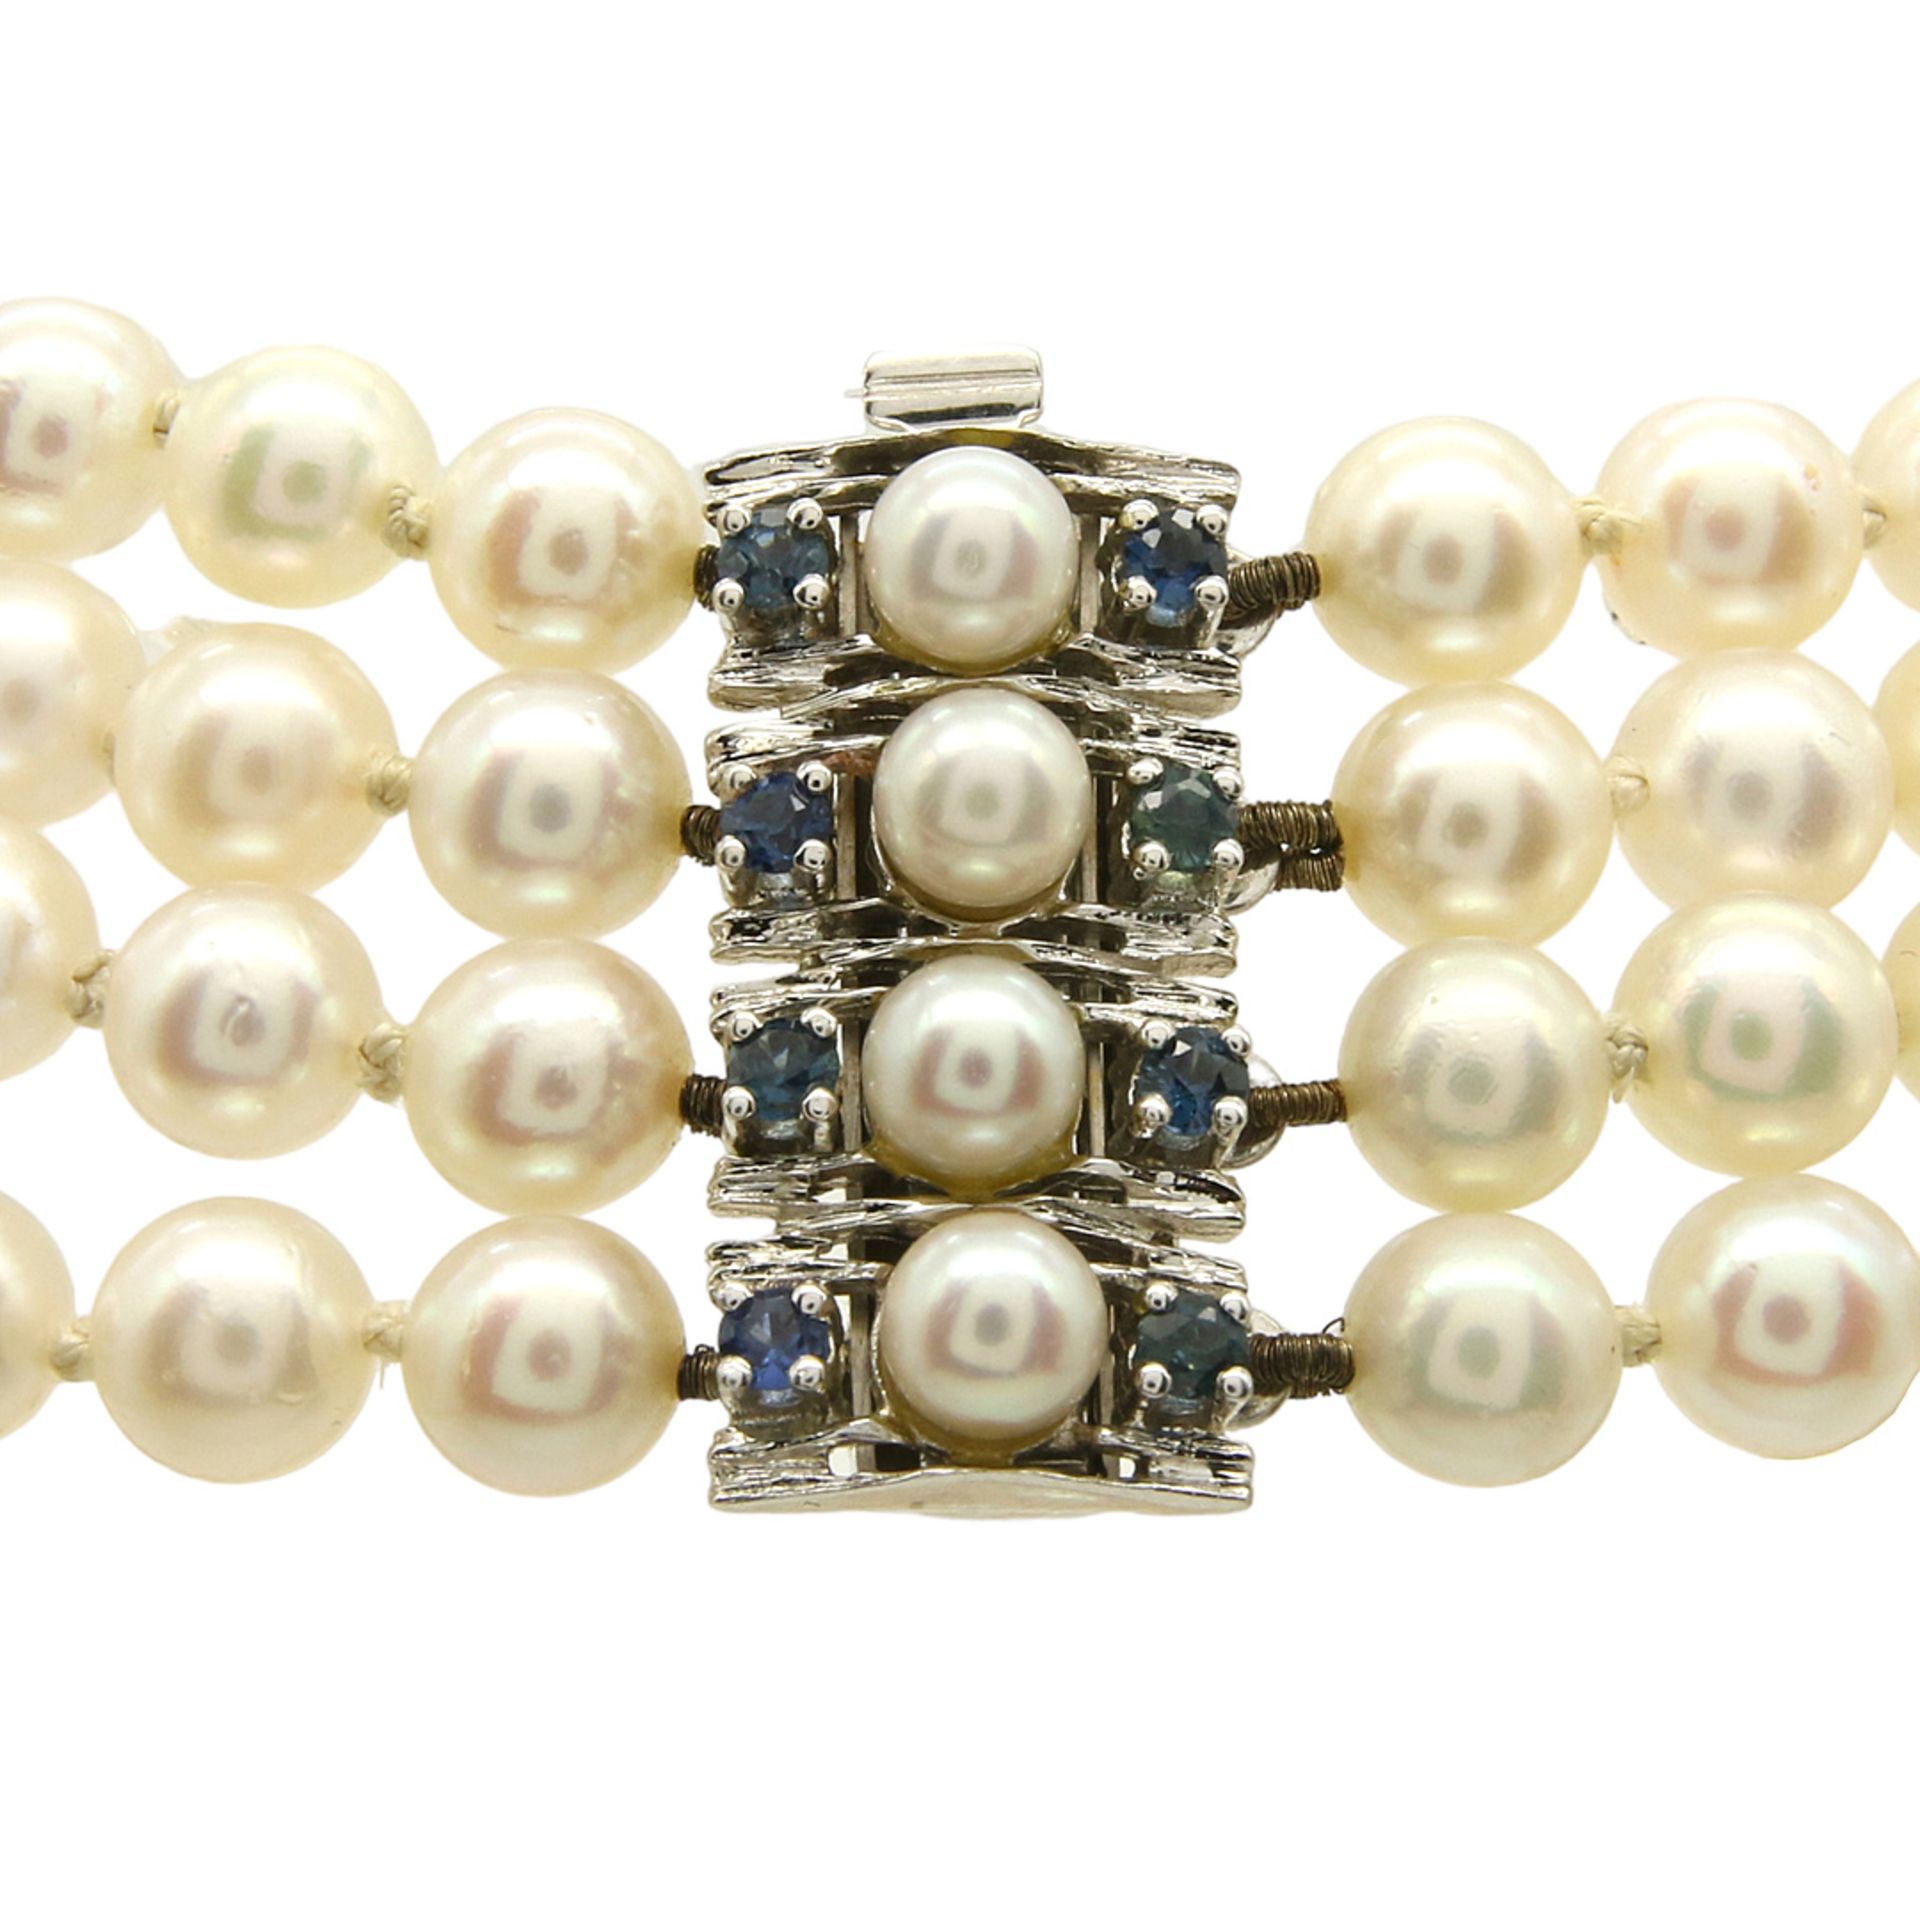 Four-row pearl bracelet with gold clasp - Image 2 of 3